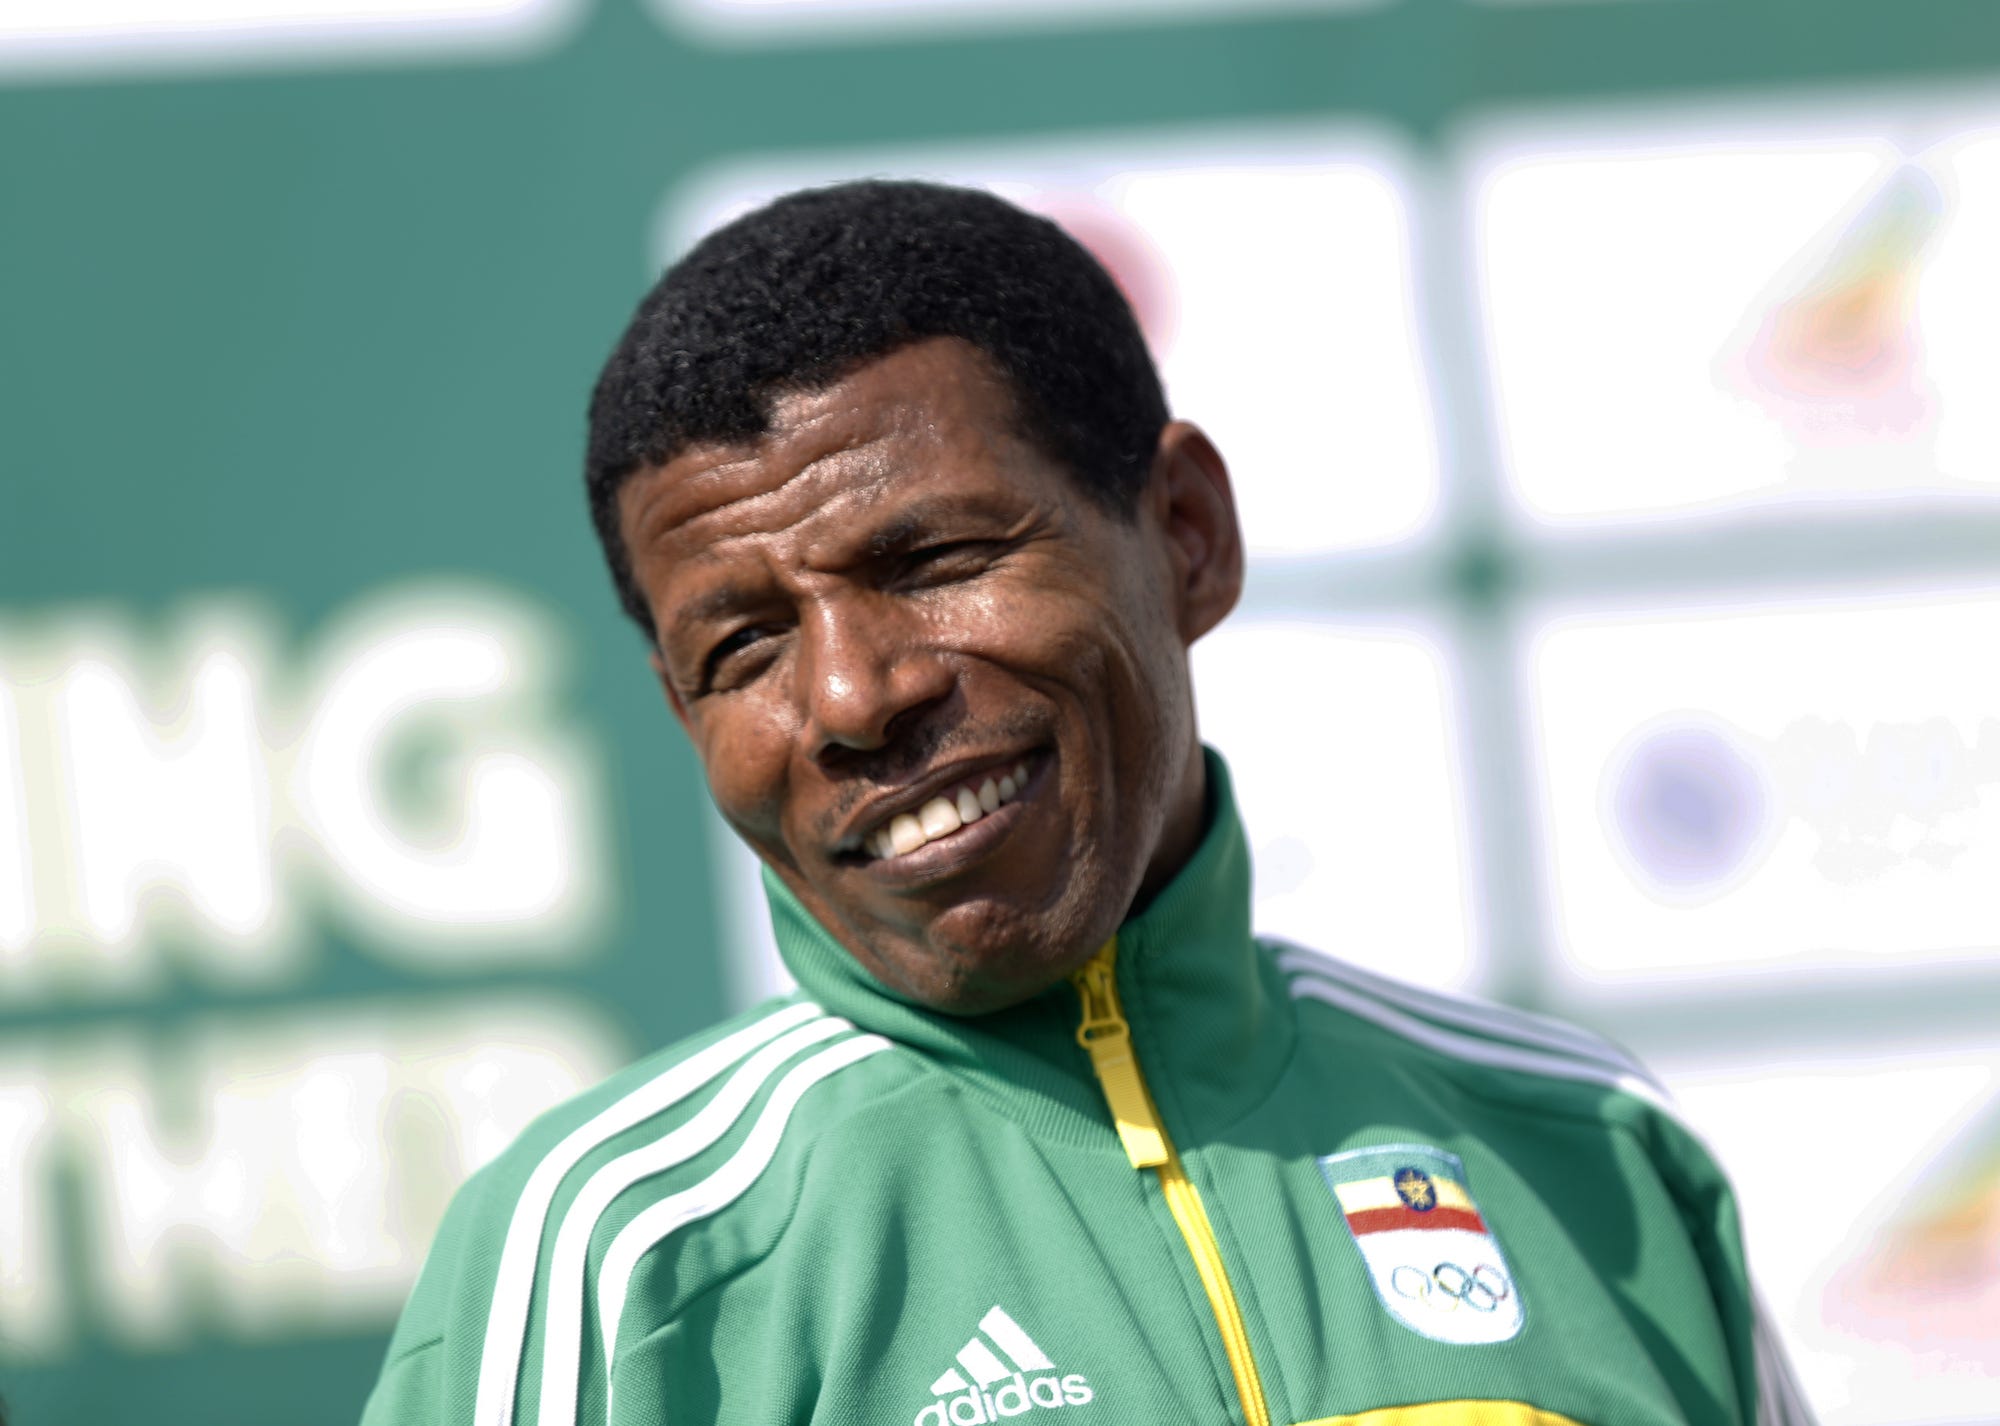 World-record holder Ethiopian athlete Haile Gebrselassie takes part in the 20th edition of Great Ethiopian Run in Addis Ababa, Ethiopia on January 10, 2021. About 12 thousand athletes from different countries along with Ethiopian athletes participated in the marathon